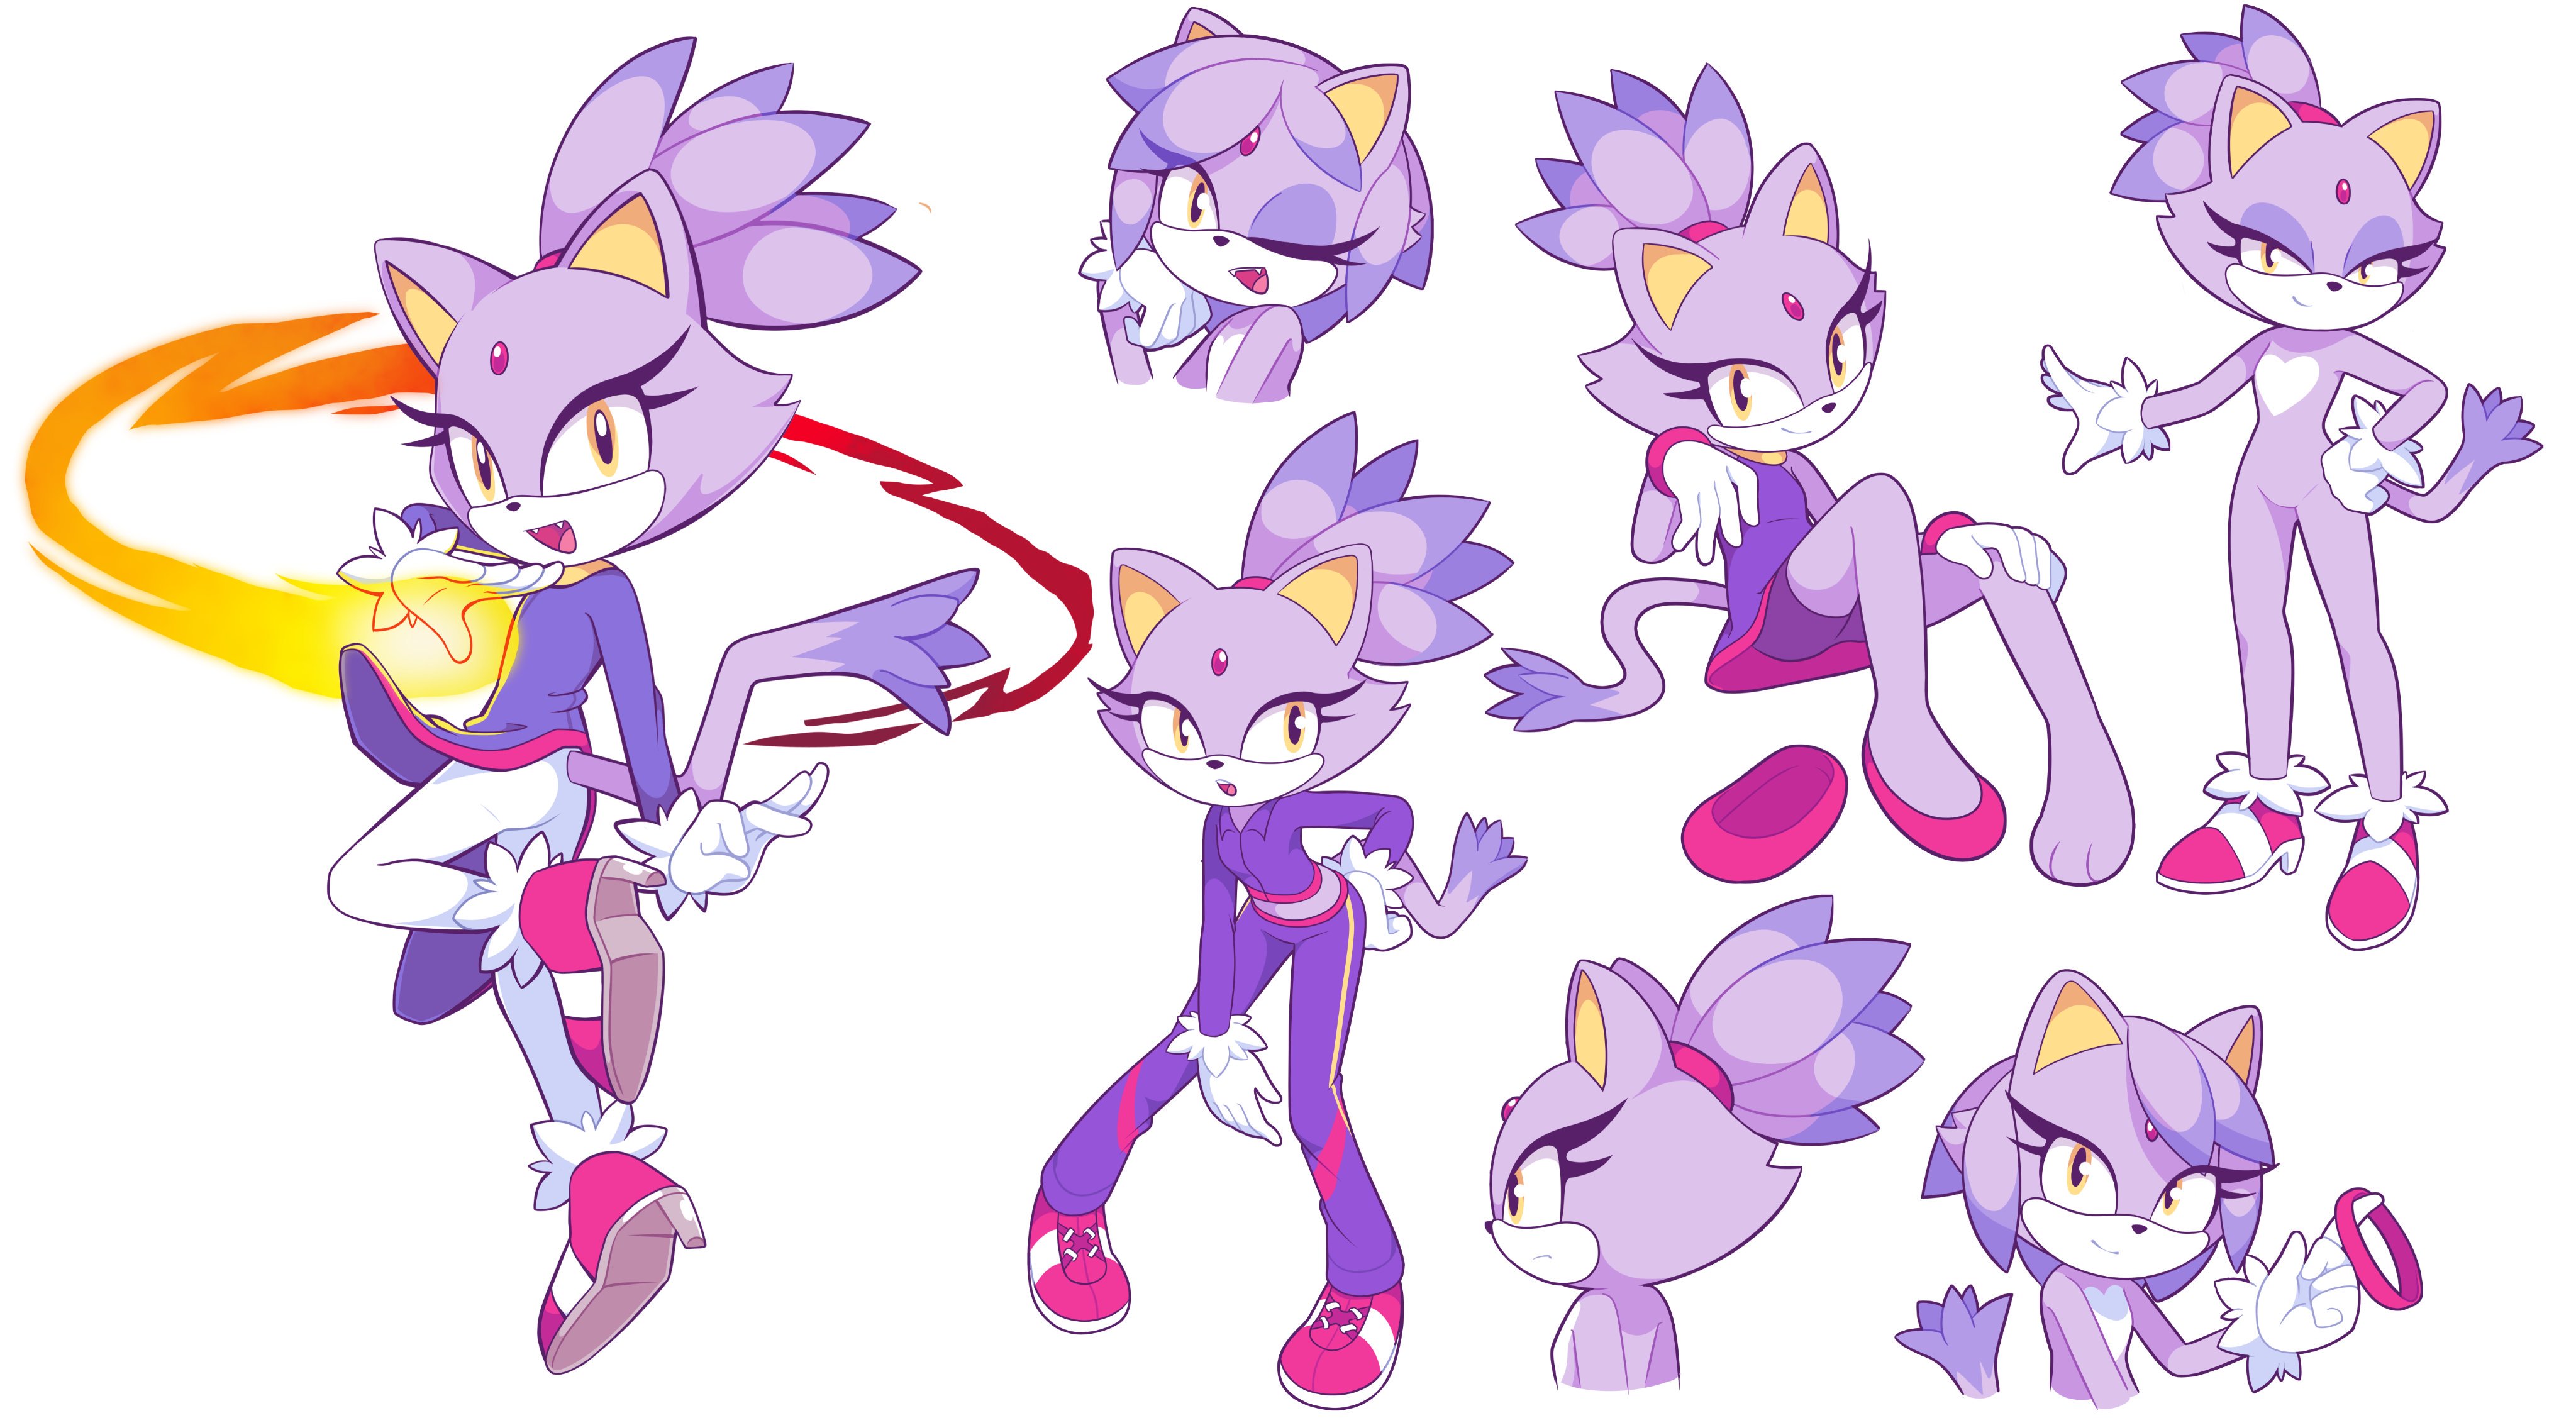 Here's a compilation of all the Blaze drawings I did last week, you ca...